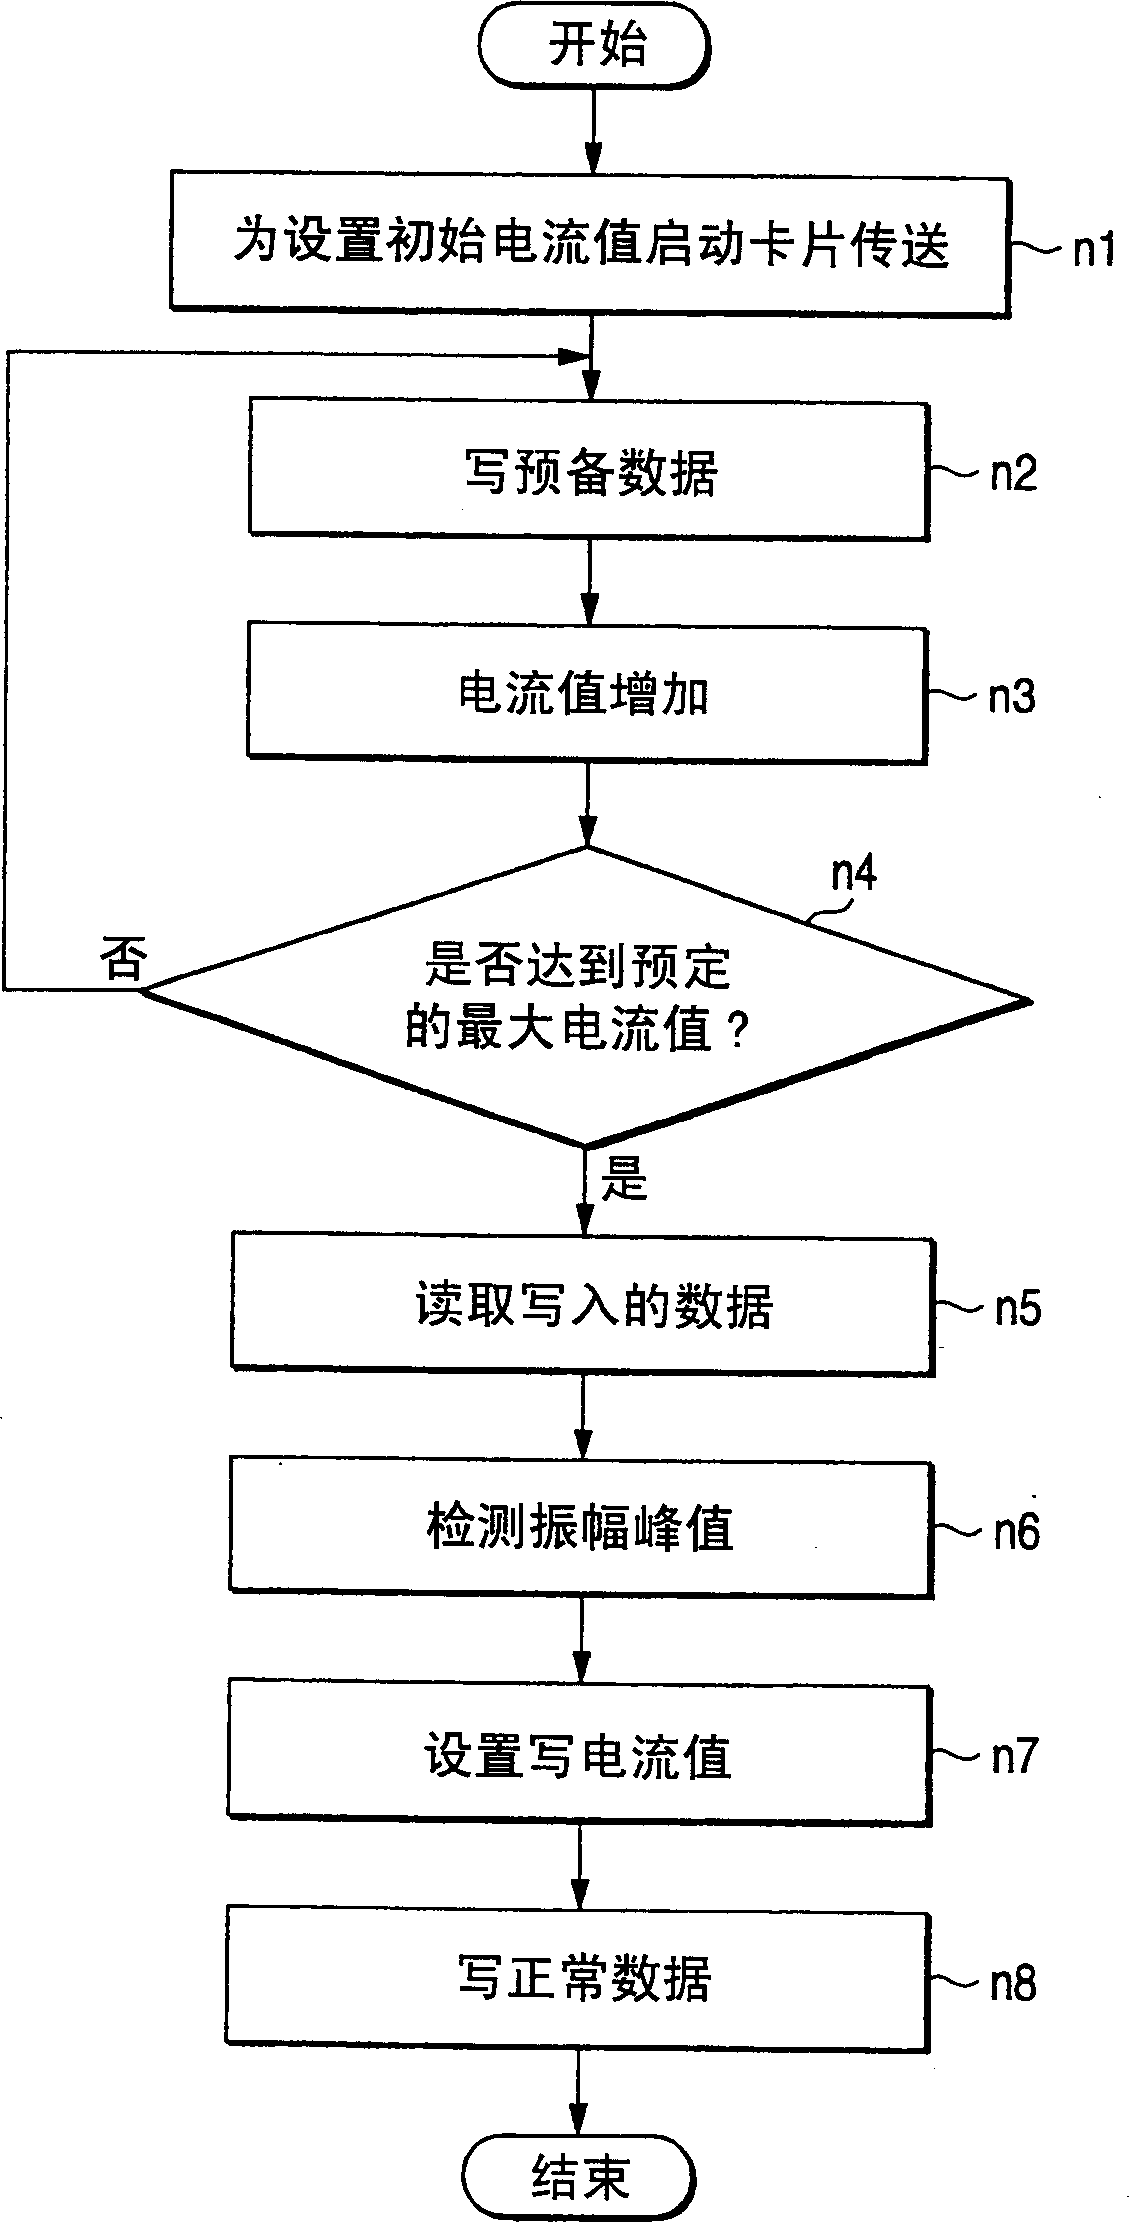 Magnetic recording method and apparatus, device for determining coercive force of magnetic recording medium